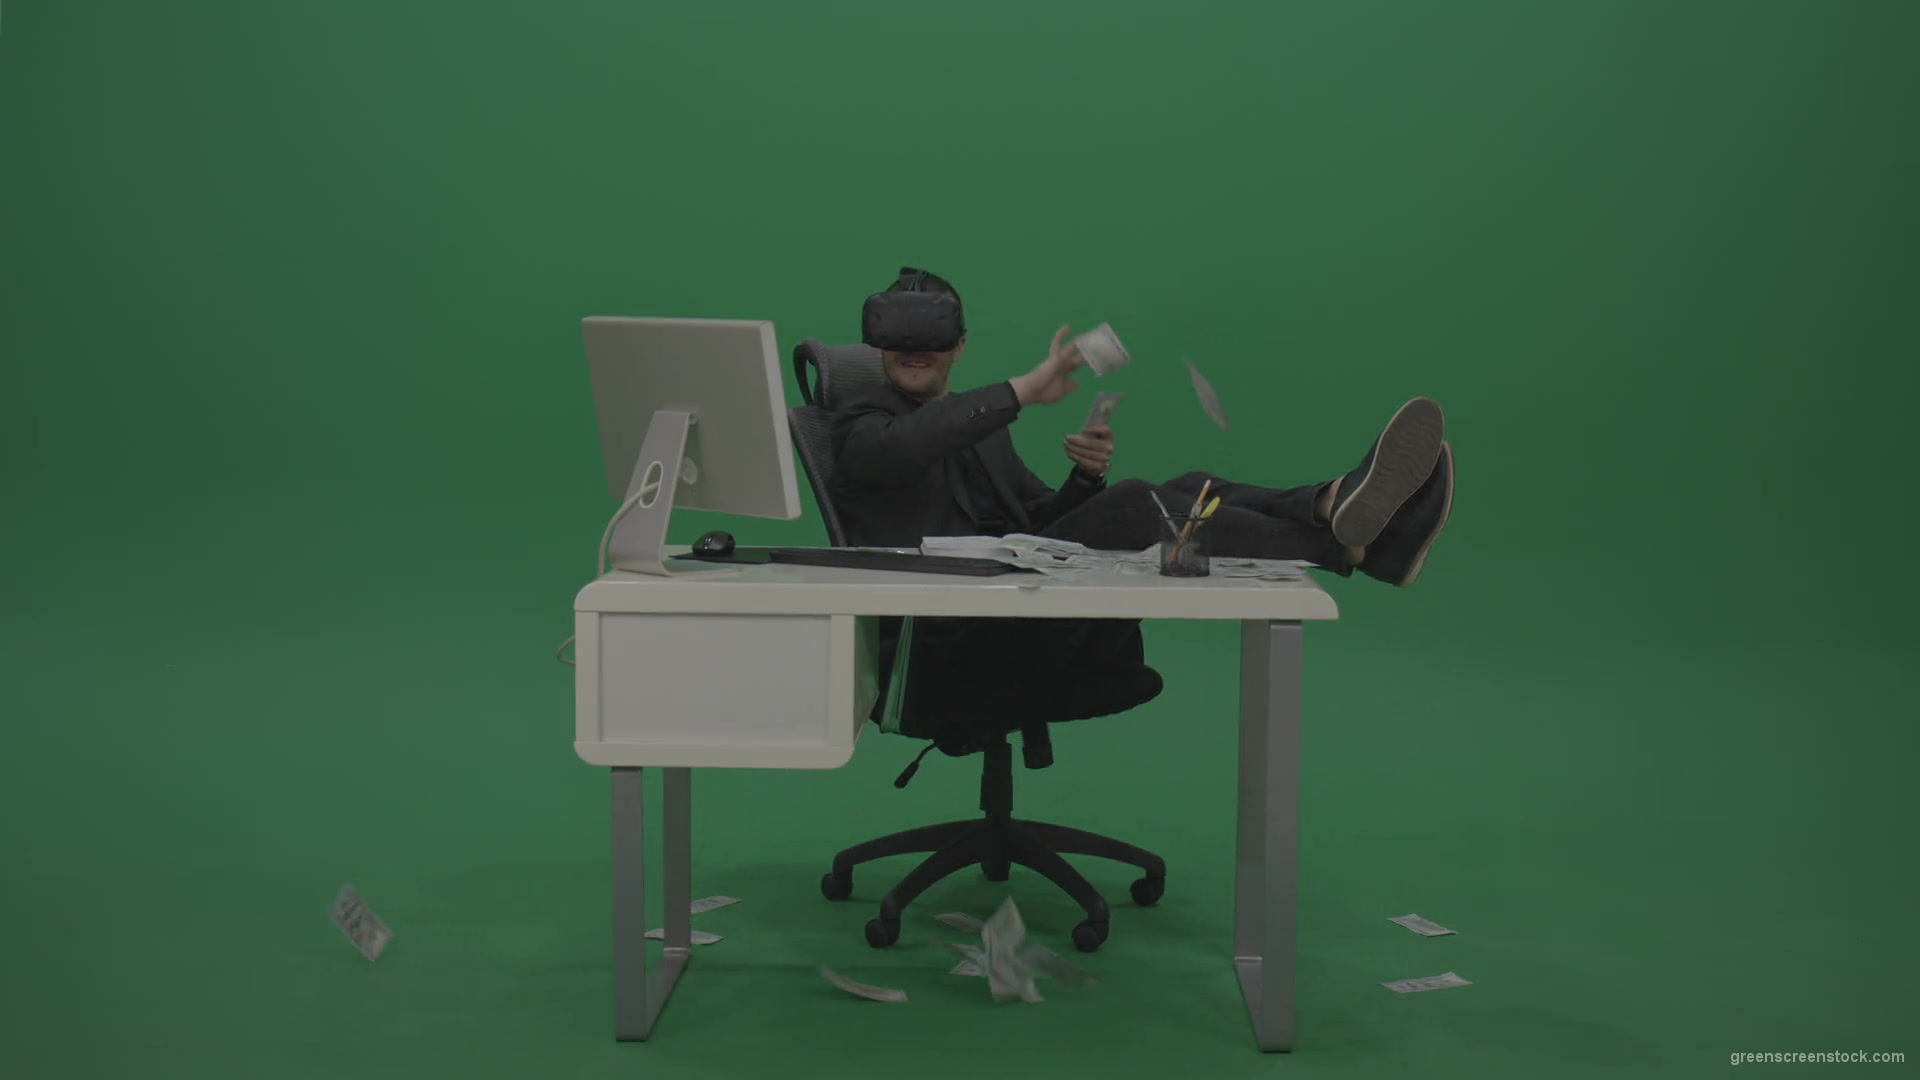 Young_Cool_Handsome_Happily_Laughing_Businessman_Sitting_At_Office_Table_Making_Money_Hasla_On_Green_Screen_Wall_Background-1920_007 Green Screen Stock